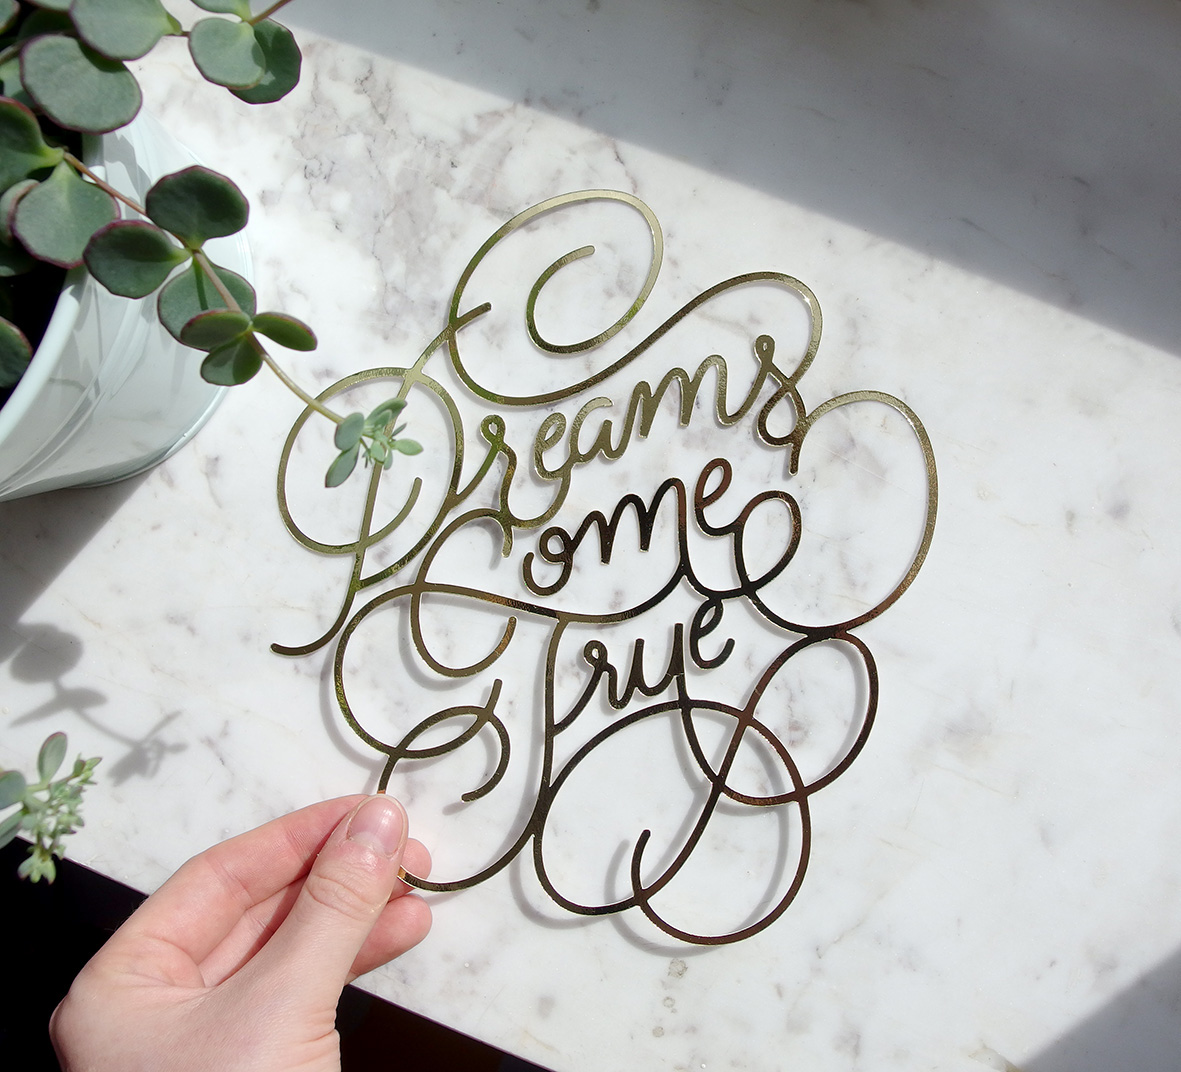 type paper lettering Sunny rainy bonjour hello cards card greting